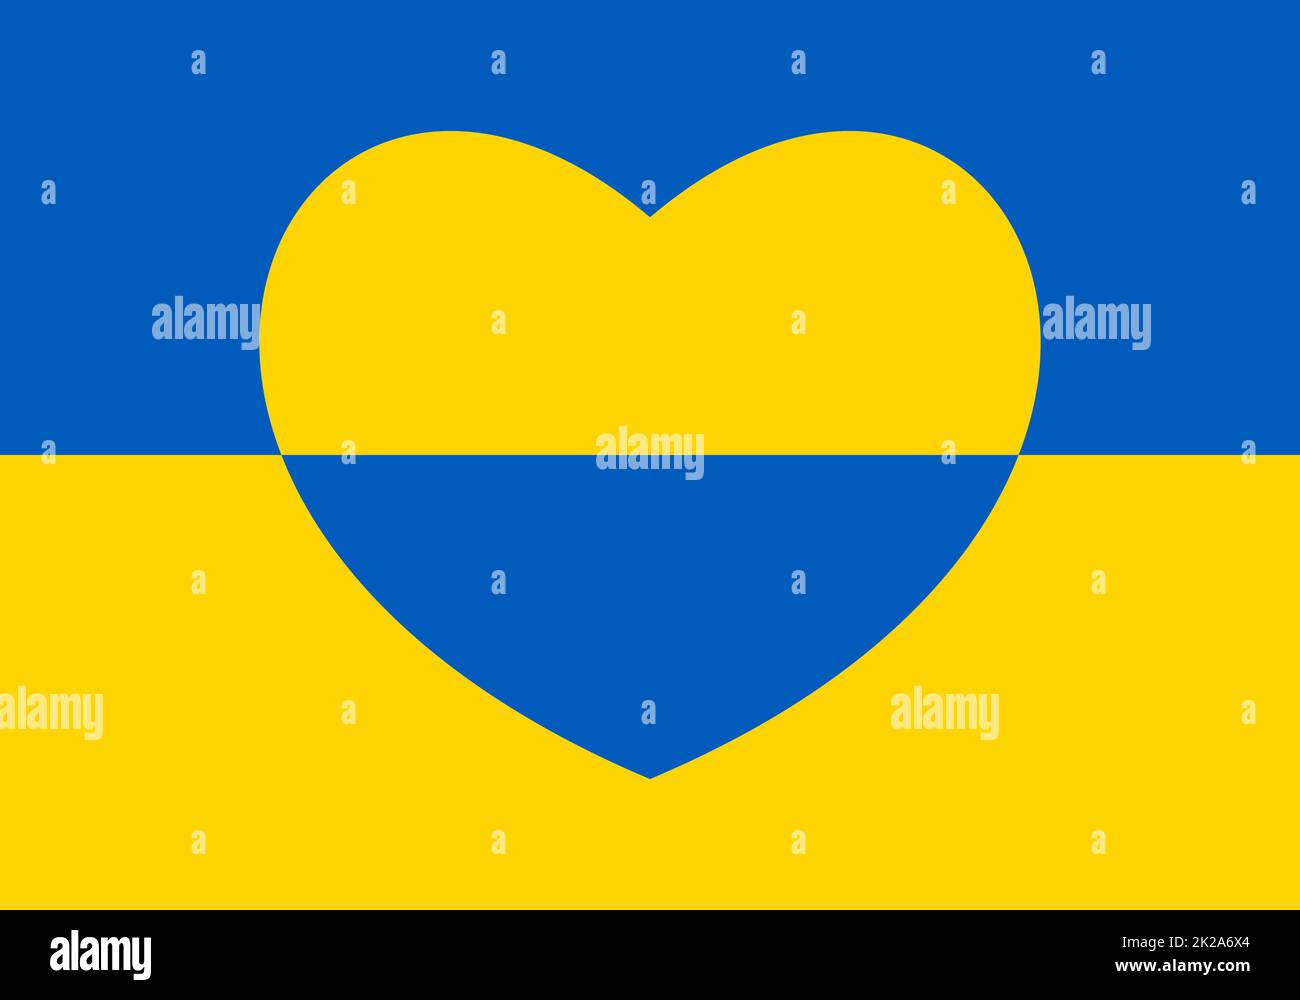 Ukraine flag icon in the shape of heart. Abstract patriotic ukrainian flag with love symbol. Blue and yellow conceptual idea - with Ukraine in his heart. Support for the country during the occupation. Stock Photo